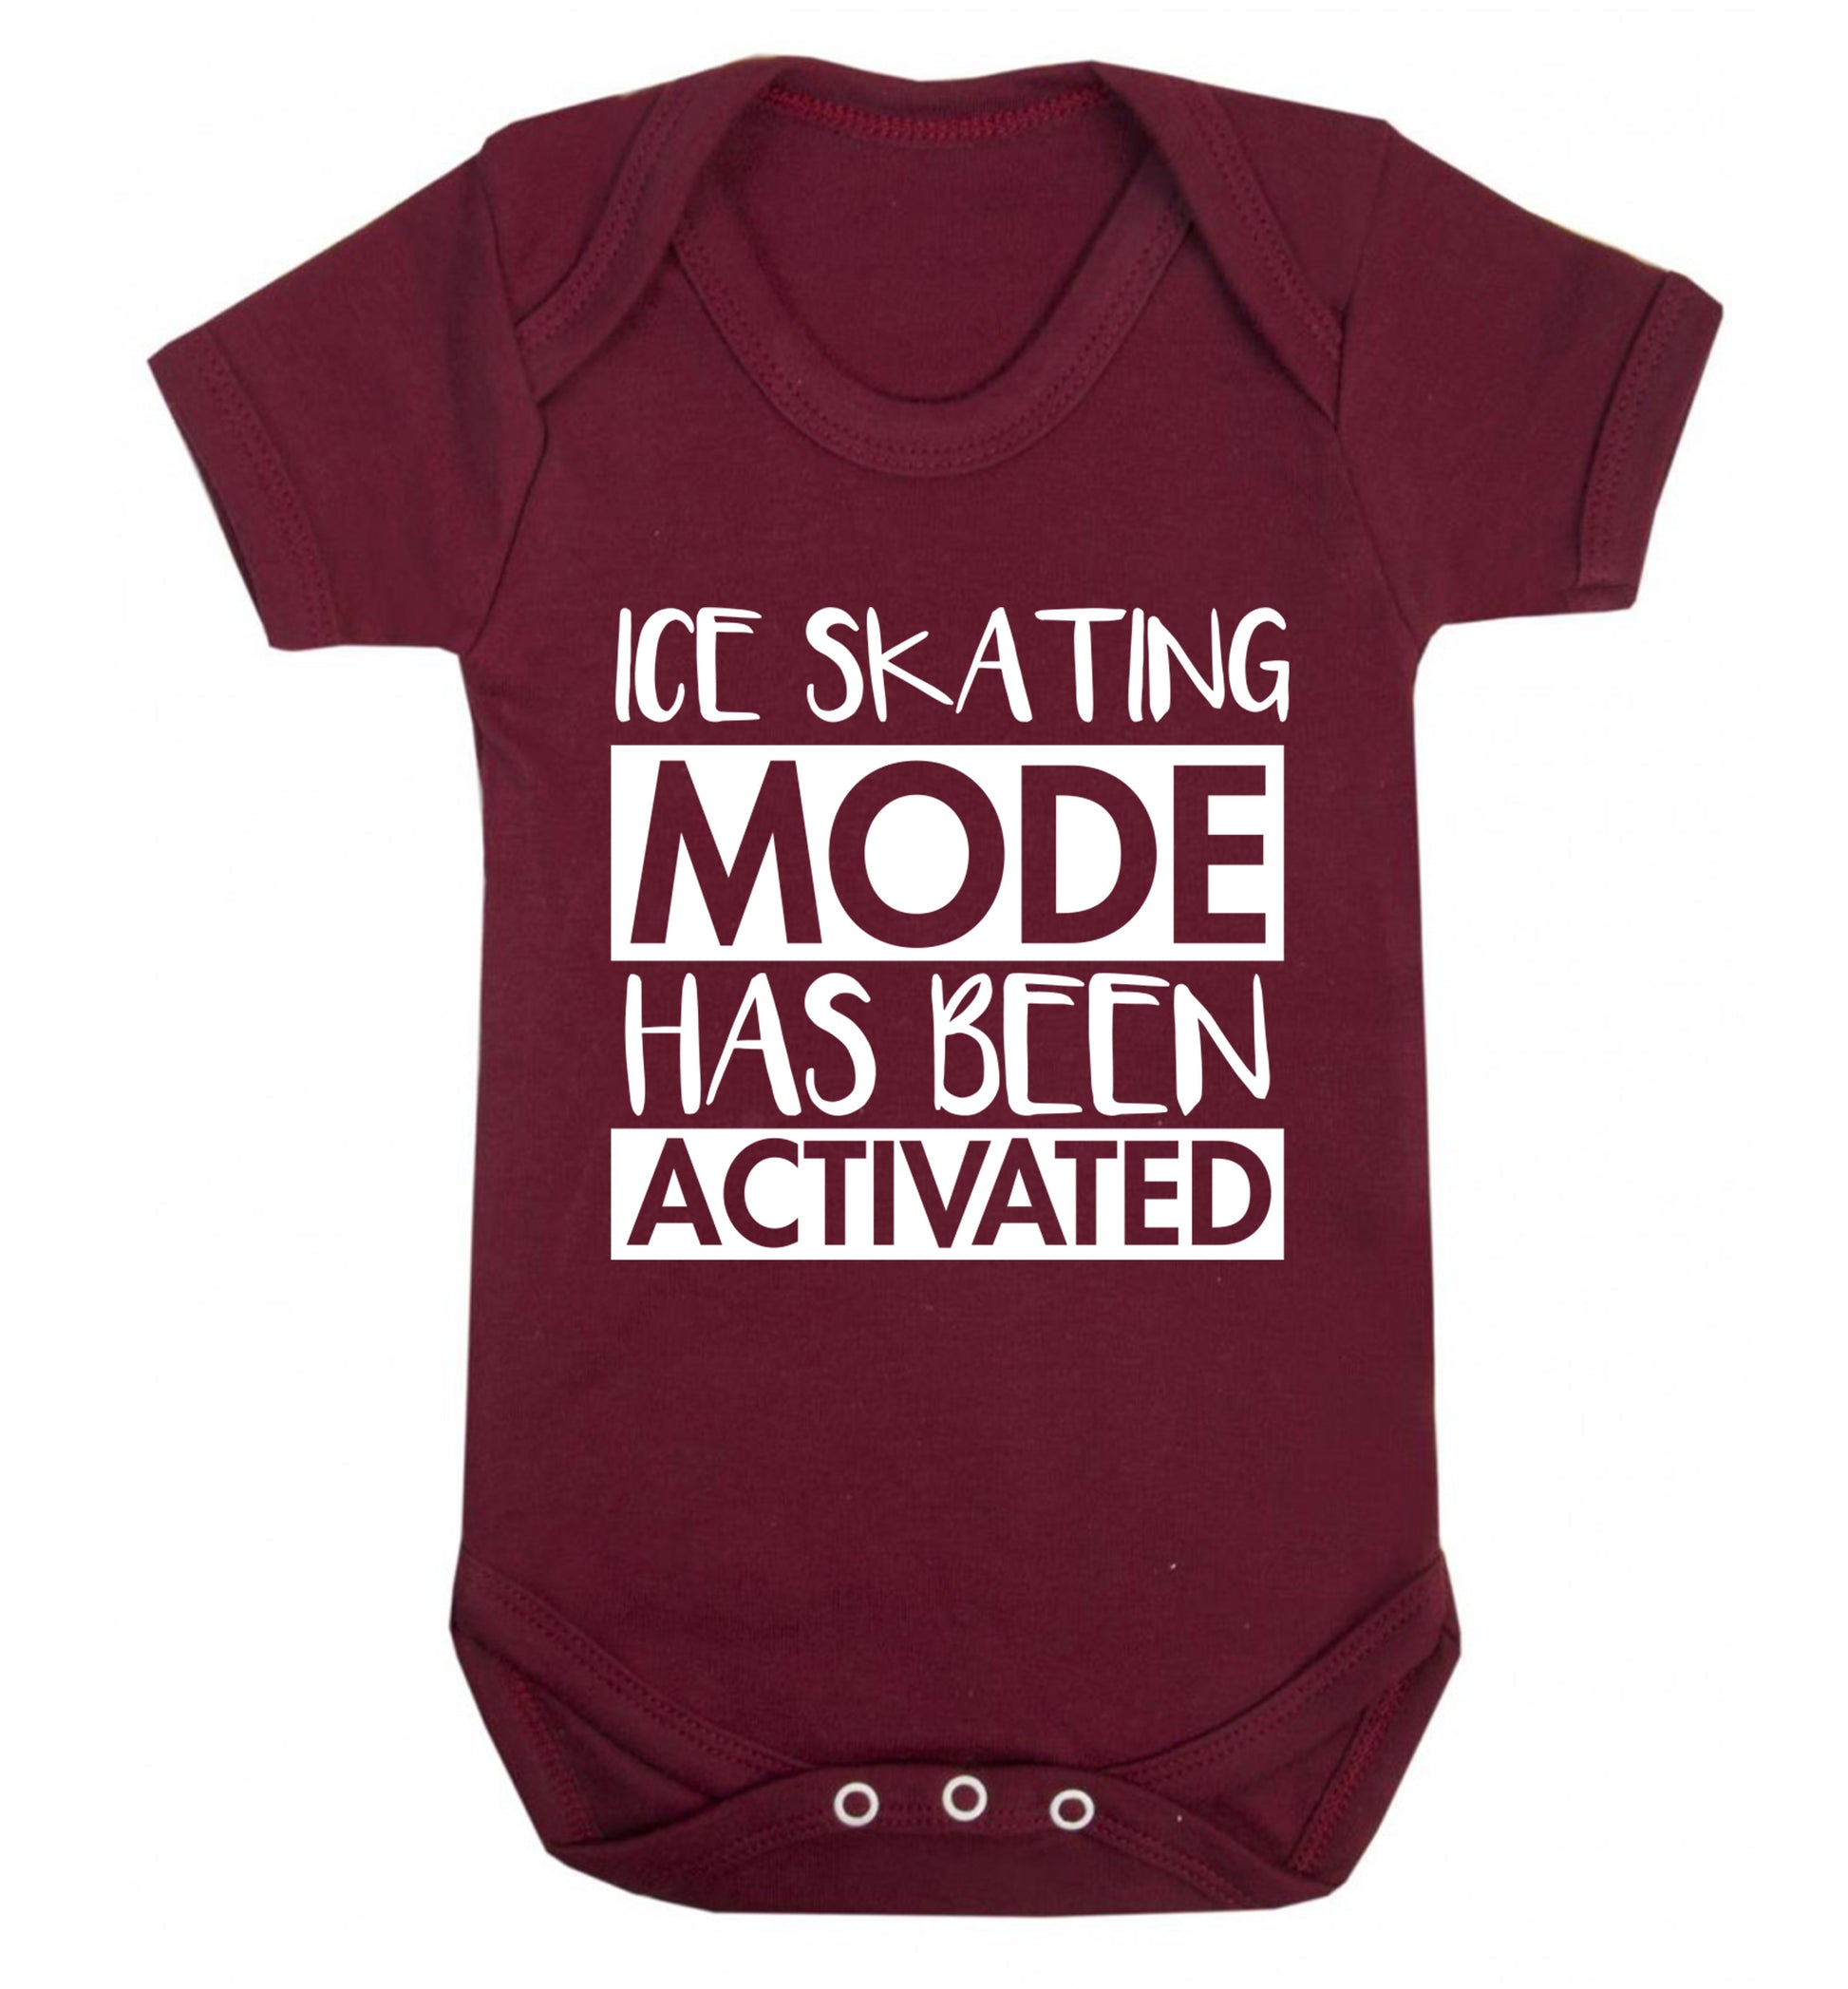 Ice skating mode activated Baby Vest maroon 18-24 months